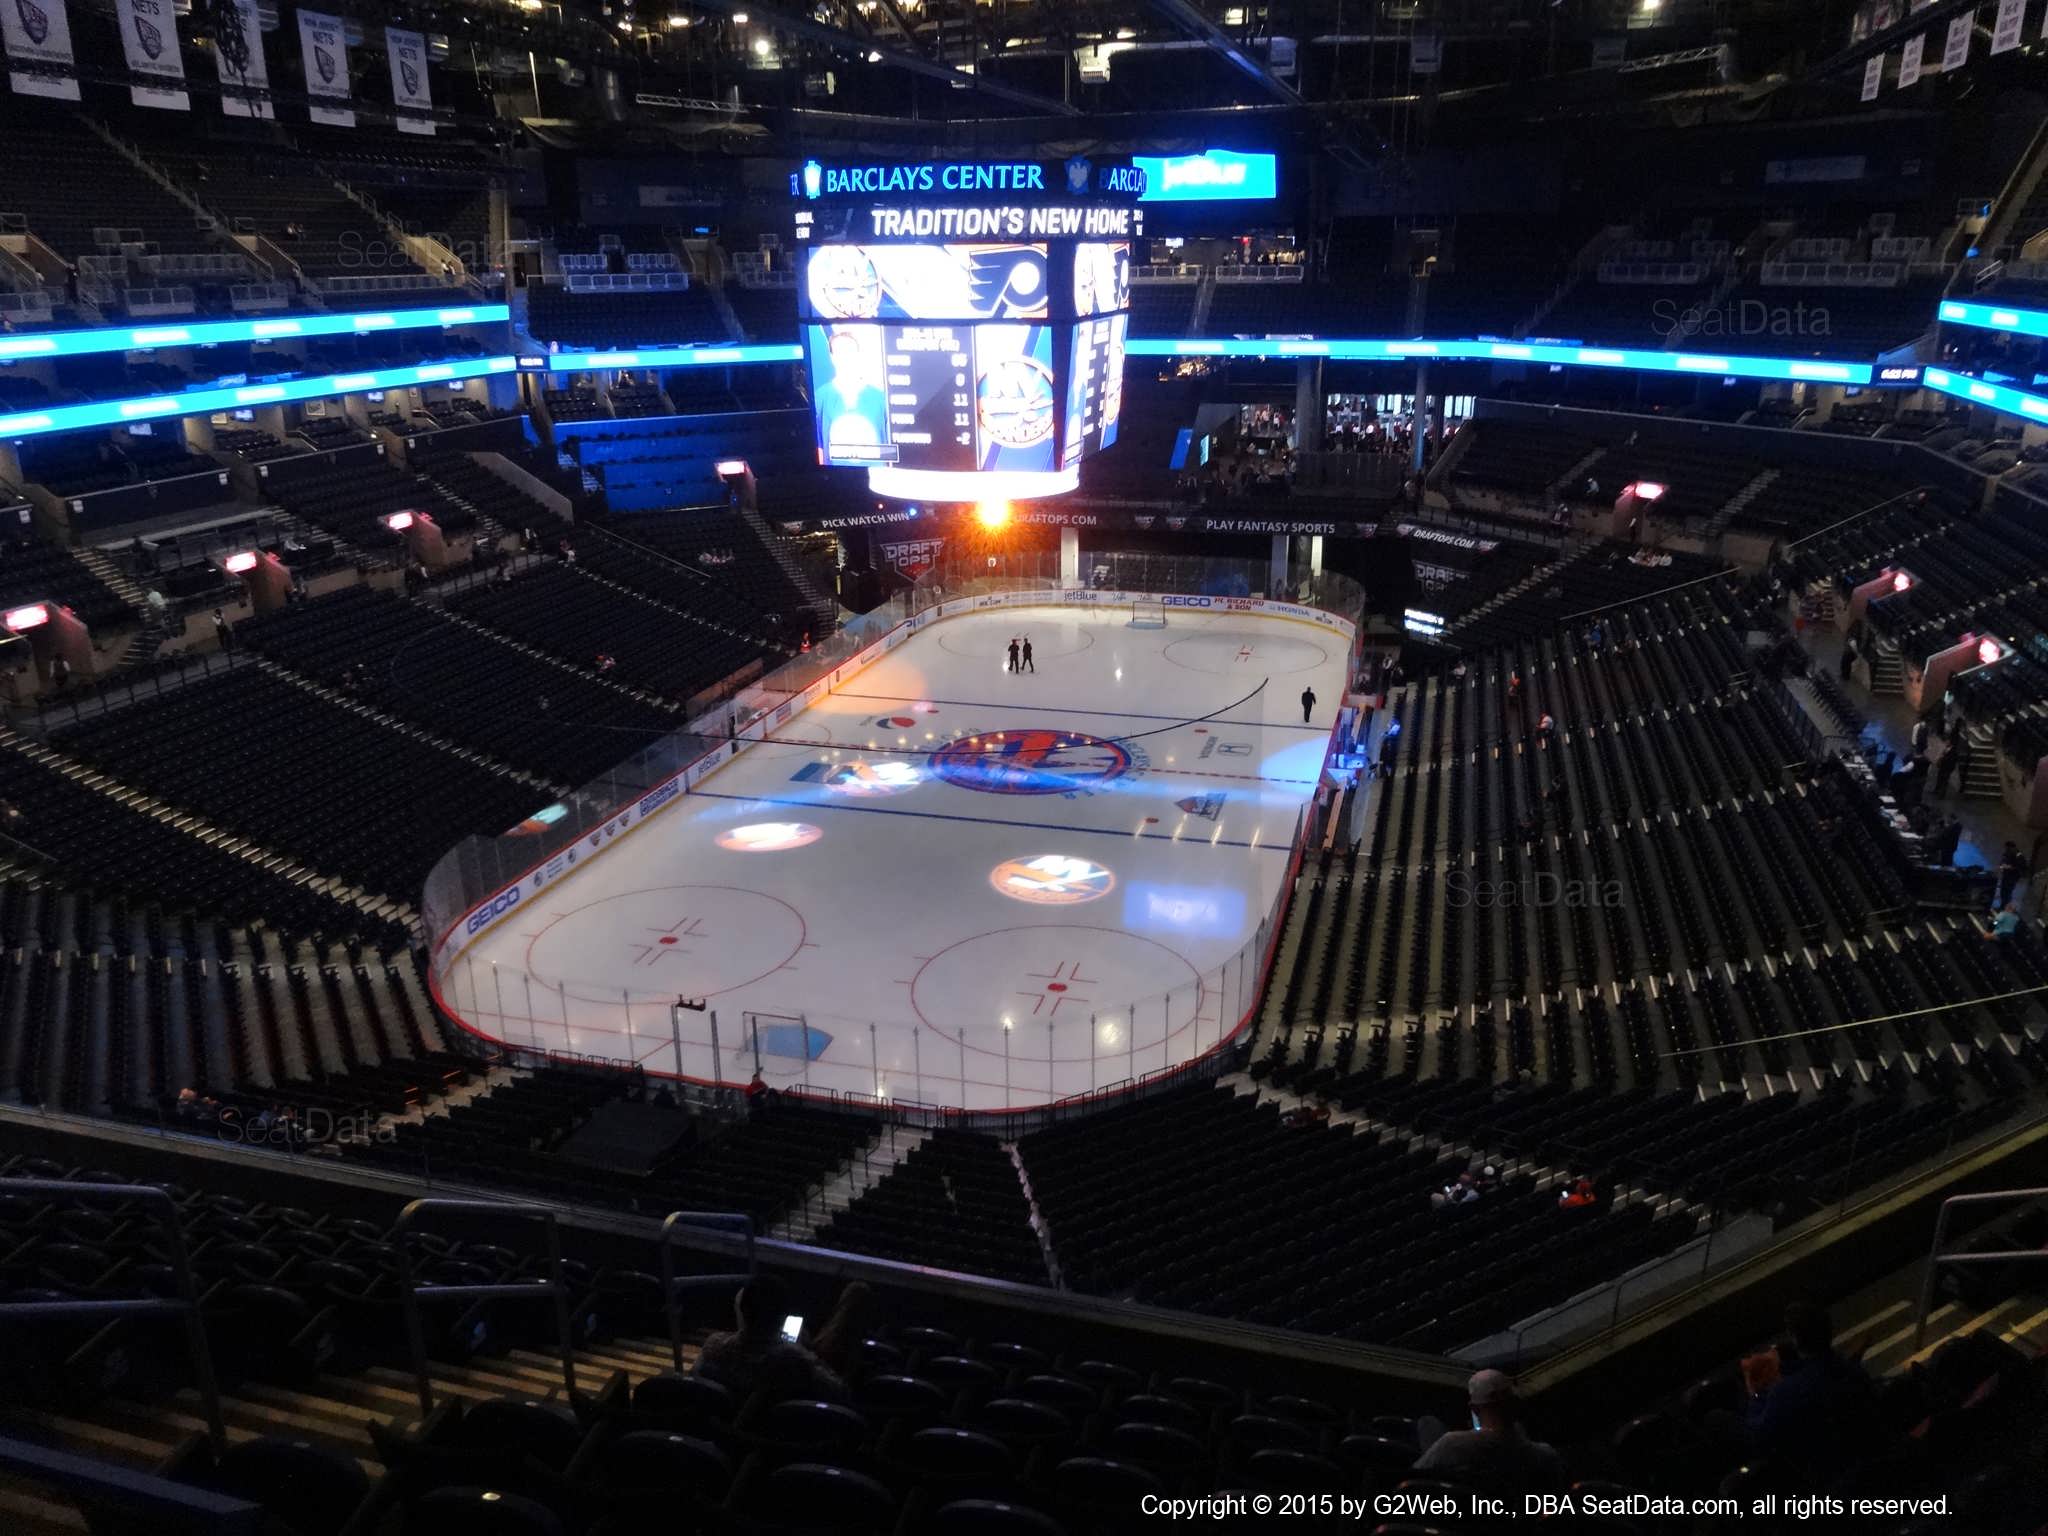 Seat View from Section 214 at the Barclays Center, home of the New York Islanders